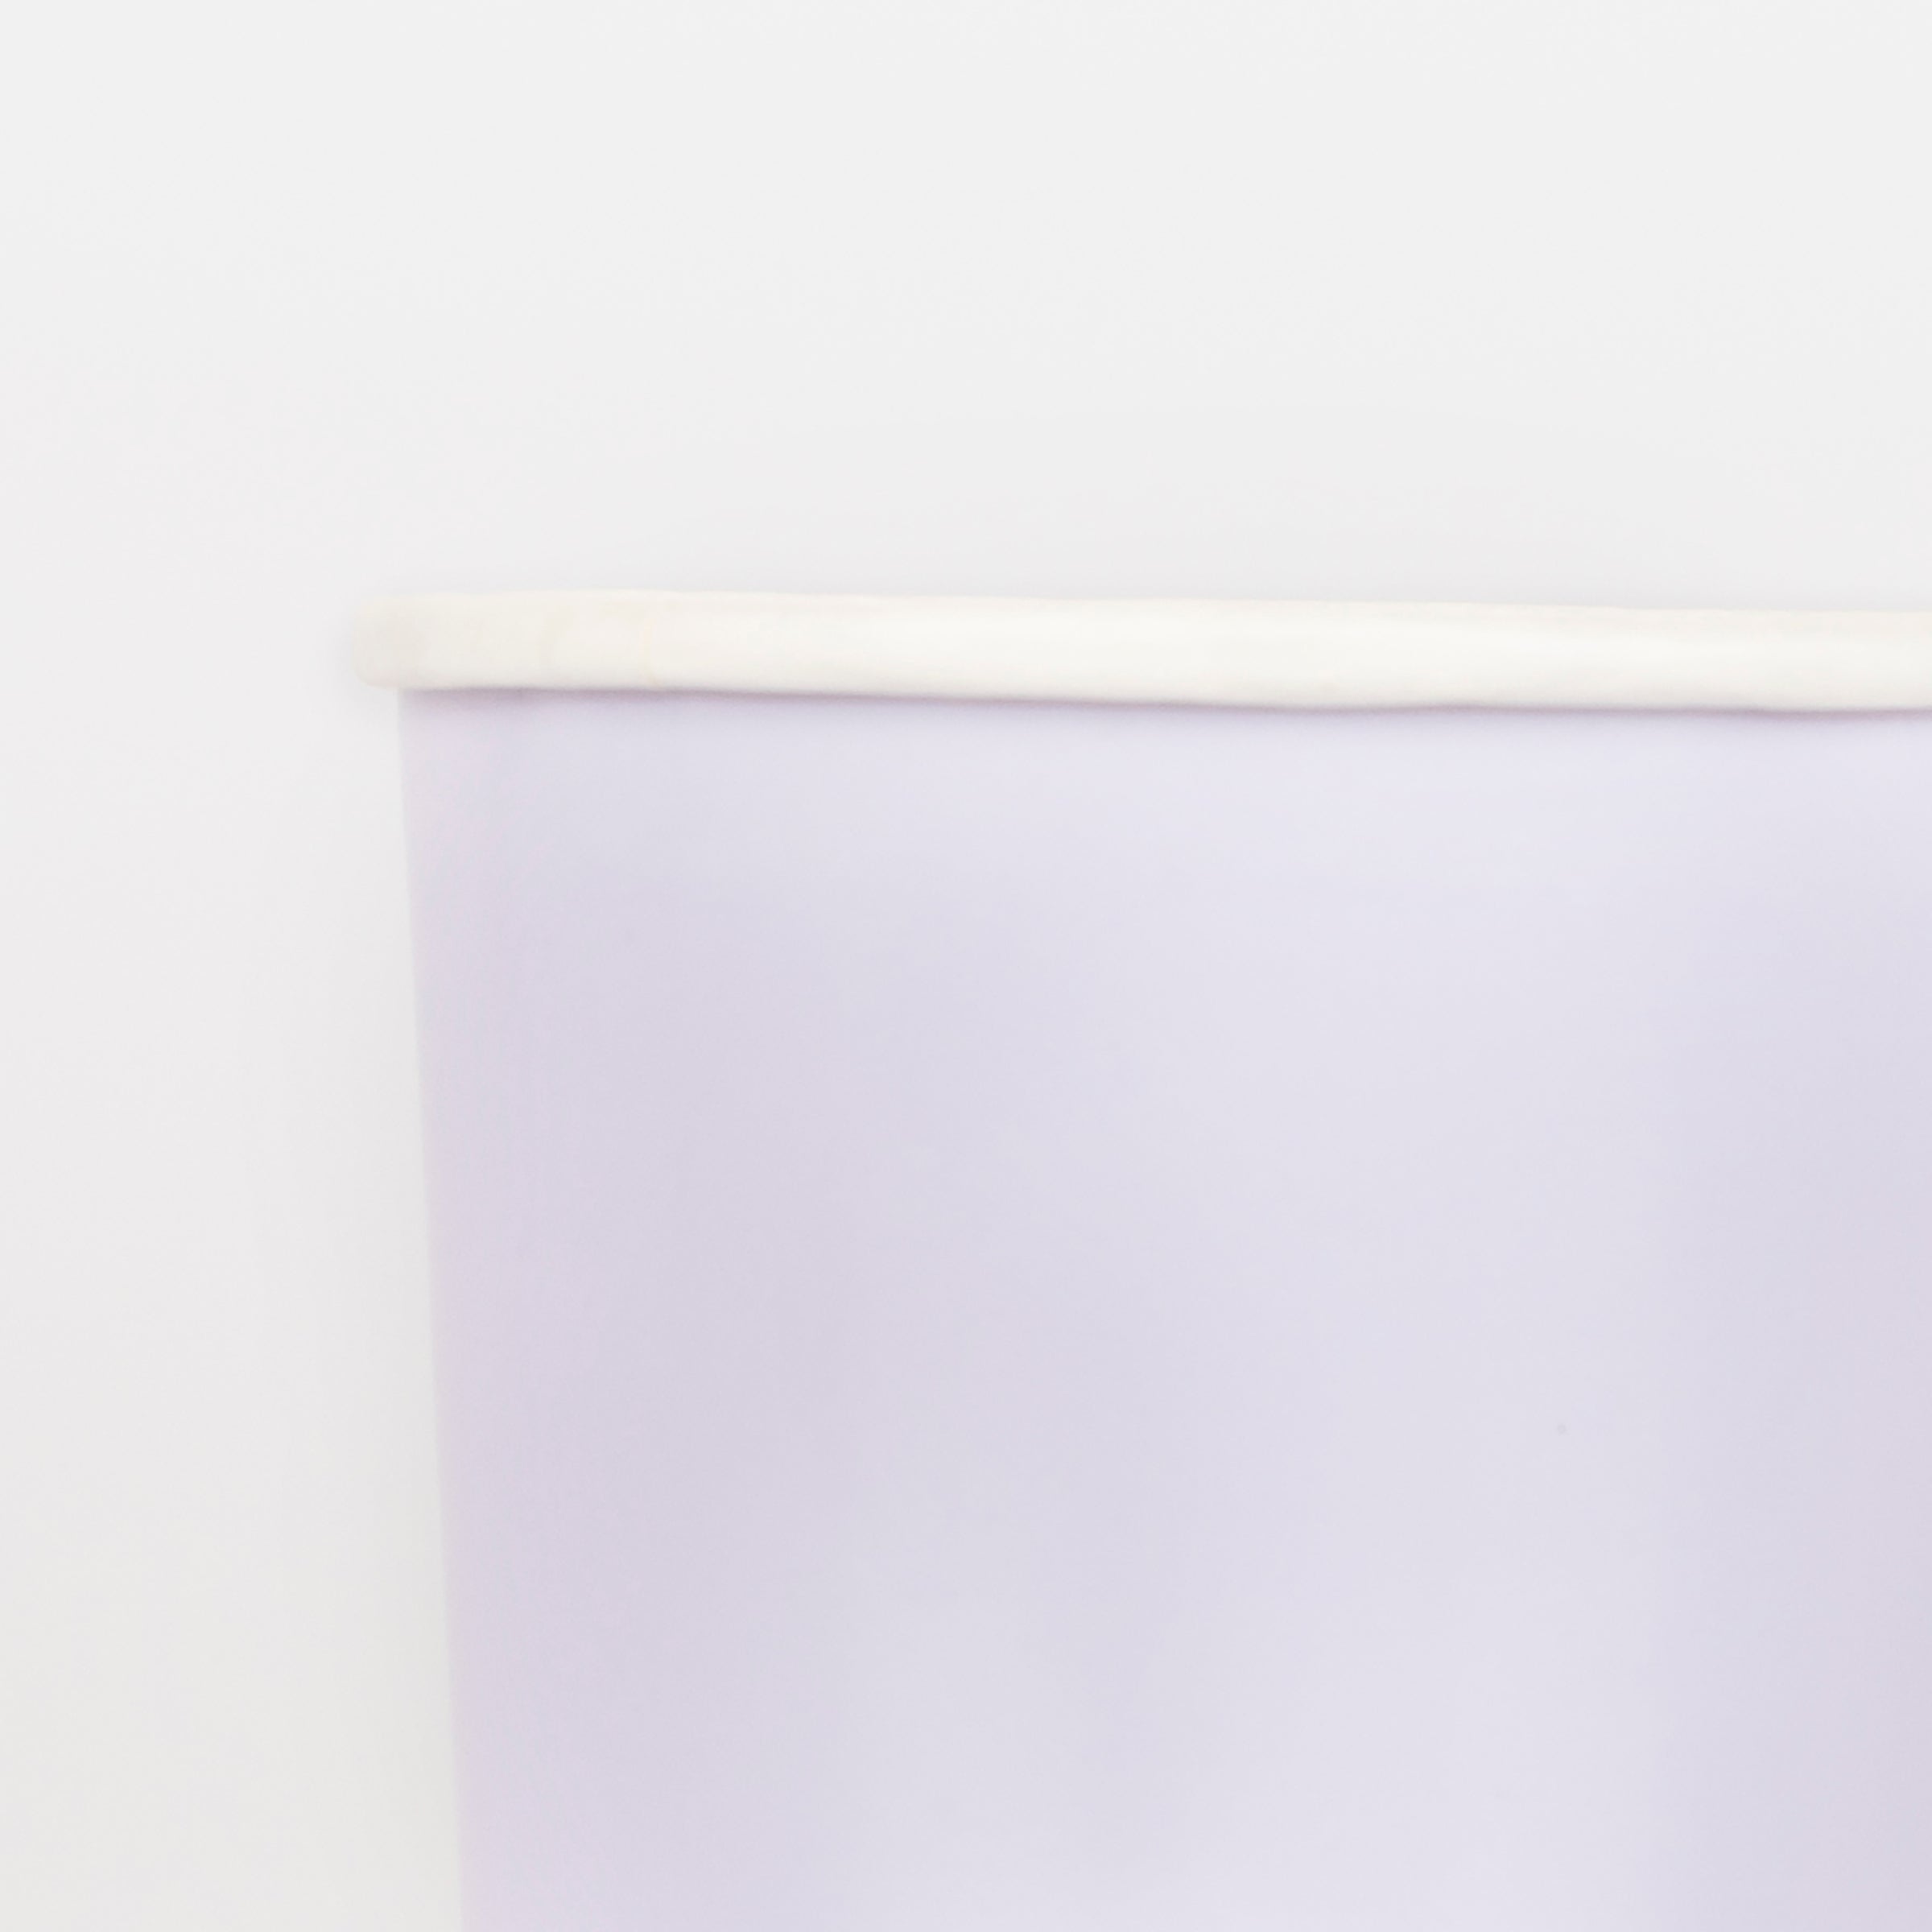 Our paper cups, in a light purple color, are perfect for a purple party.